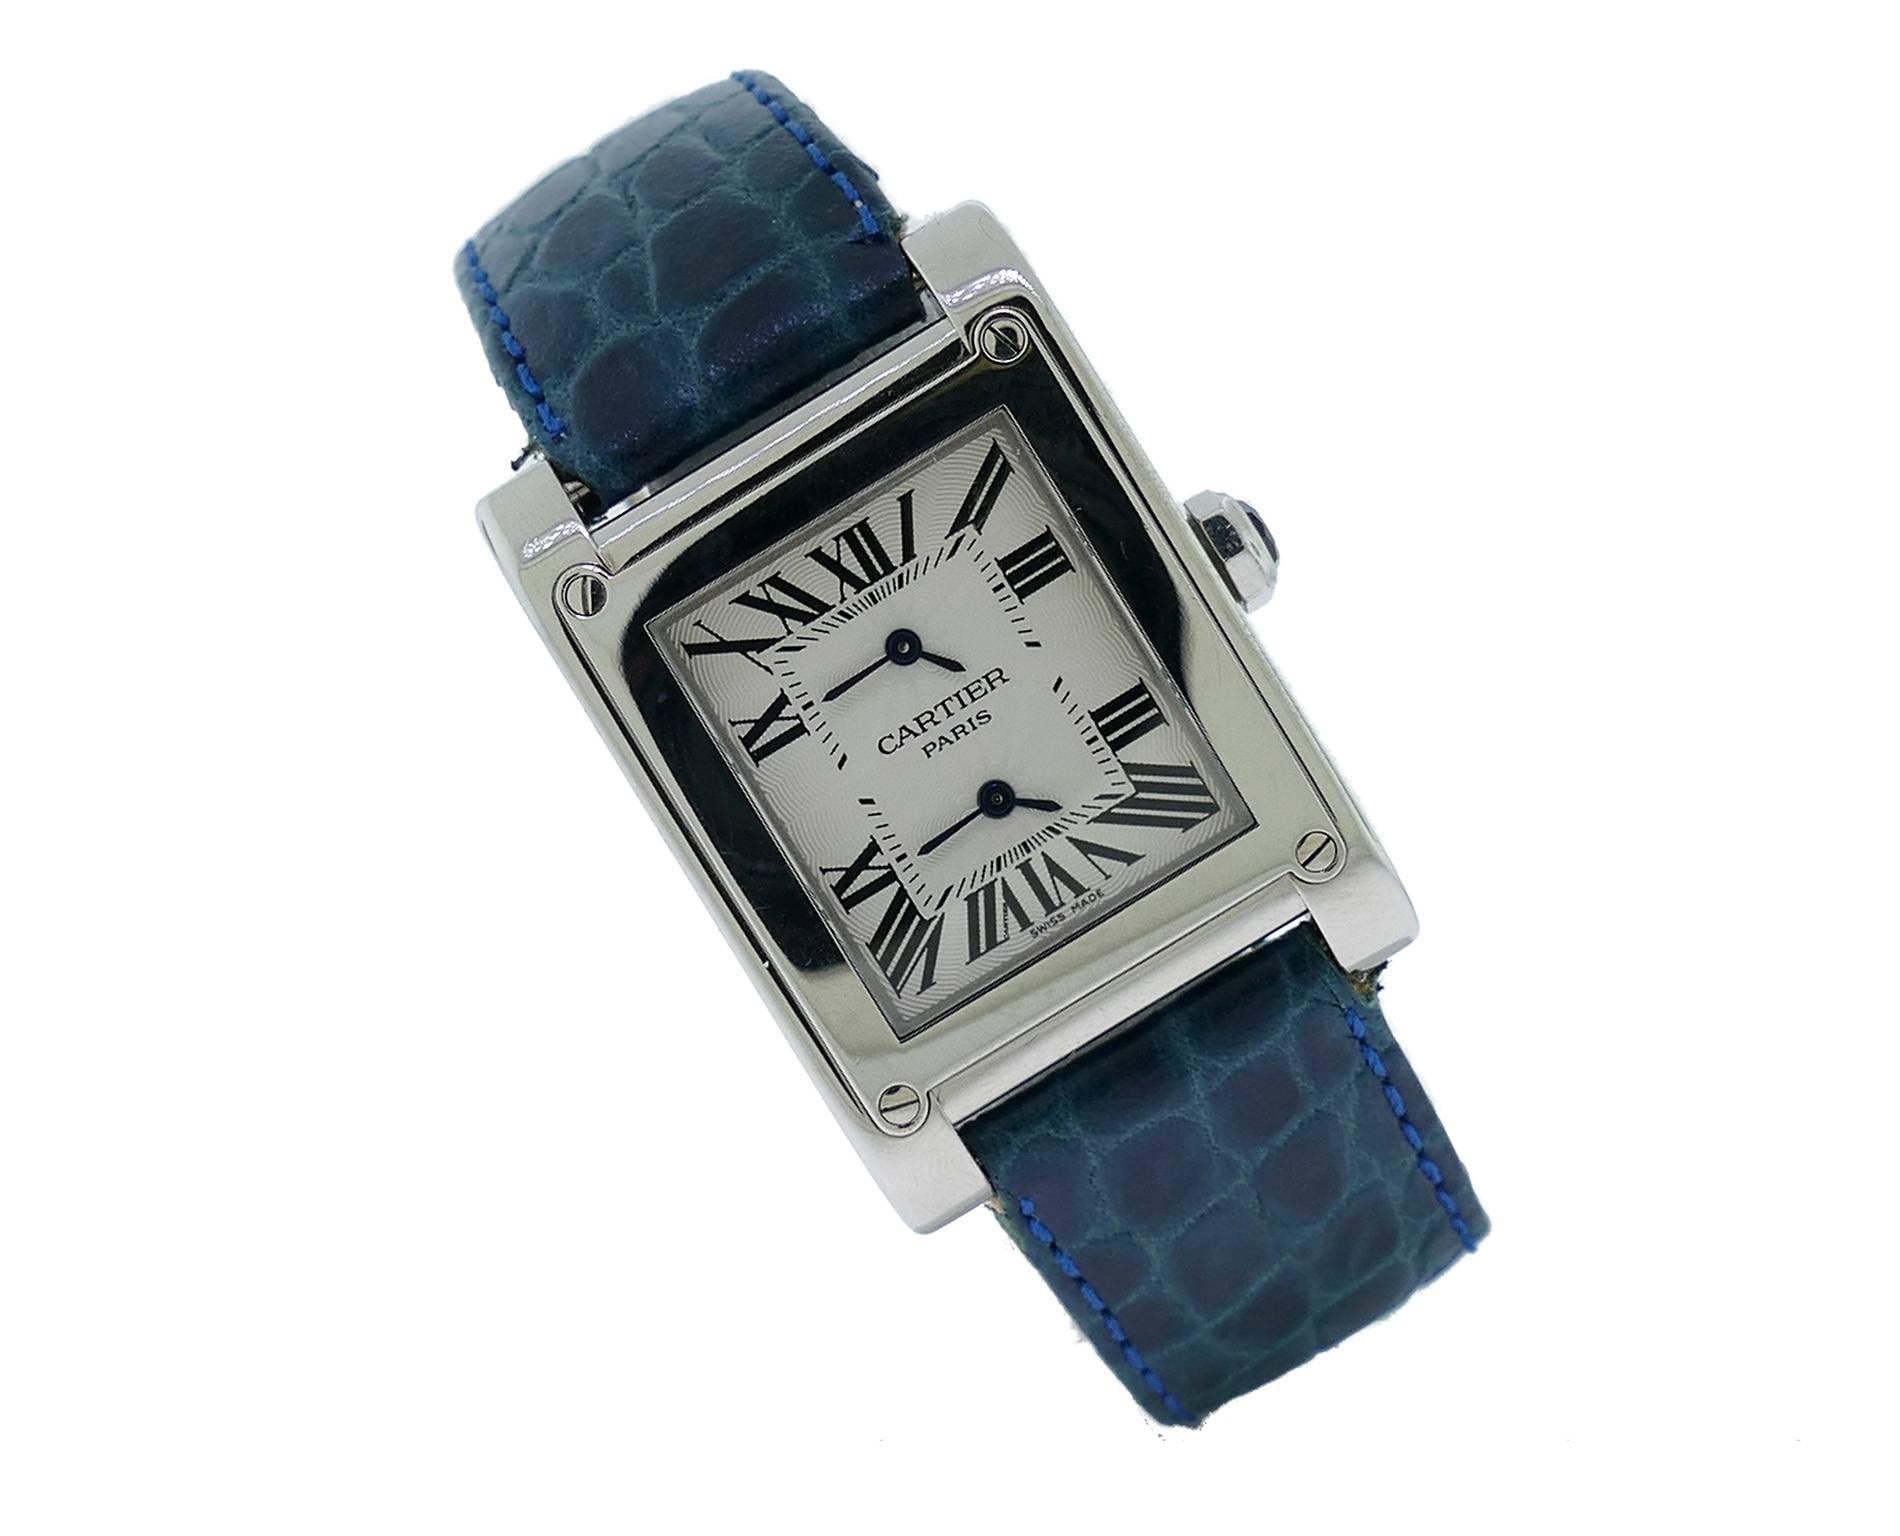 Mens (28x35mm) Cartier Privee Tank A Vis Dual Time 18k White Gold Watch. The Watch is in Great Condition & Keeping Great Time, Movement is Operated by Mechanical Hand Winding. The Watch is on a Generic Strap & Cartier 18k Deployment Buckle. Included